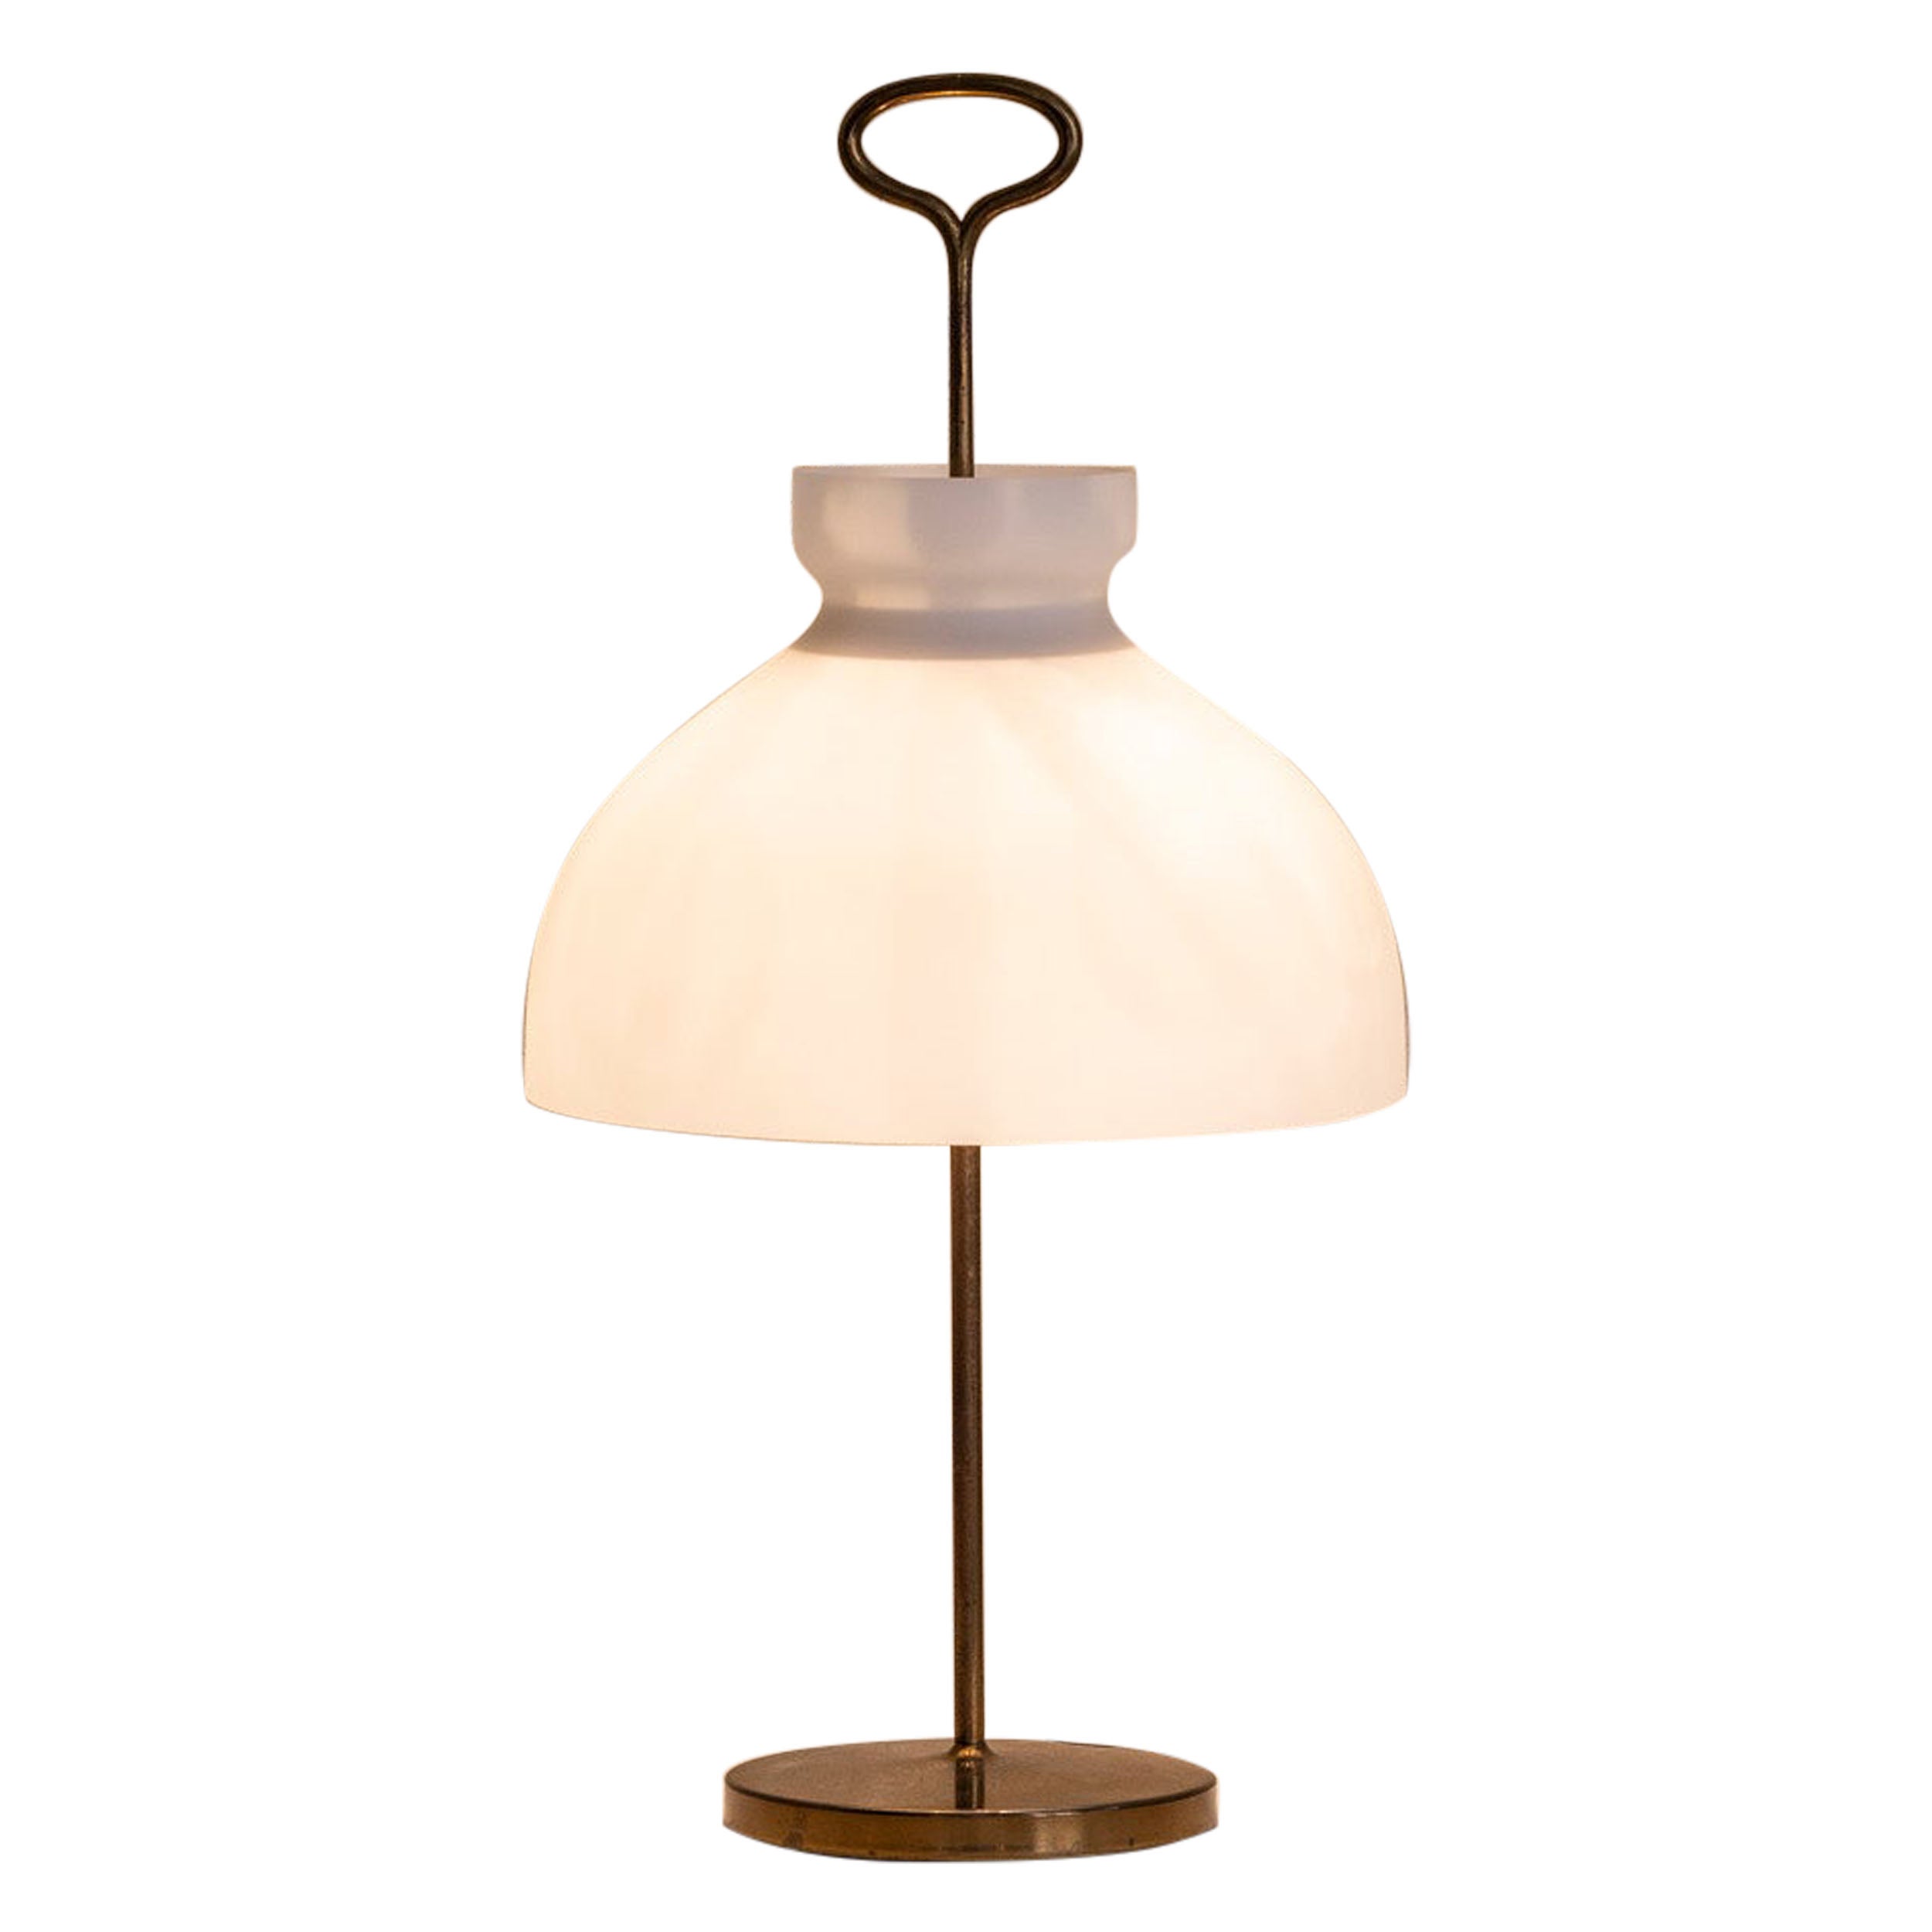  Midcentury Arenzano table lamp by Ignazio Gardella for Azucena, Italy 1956 For Sale